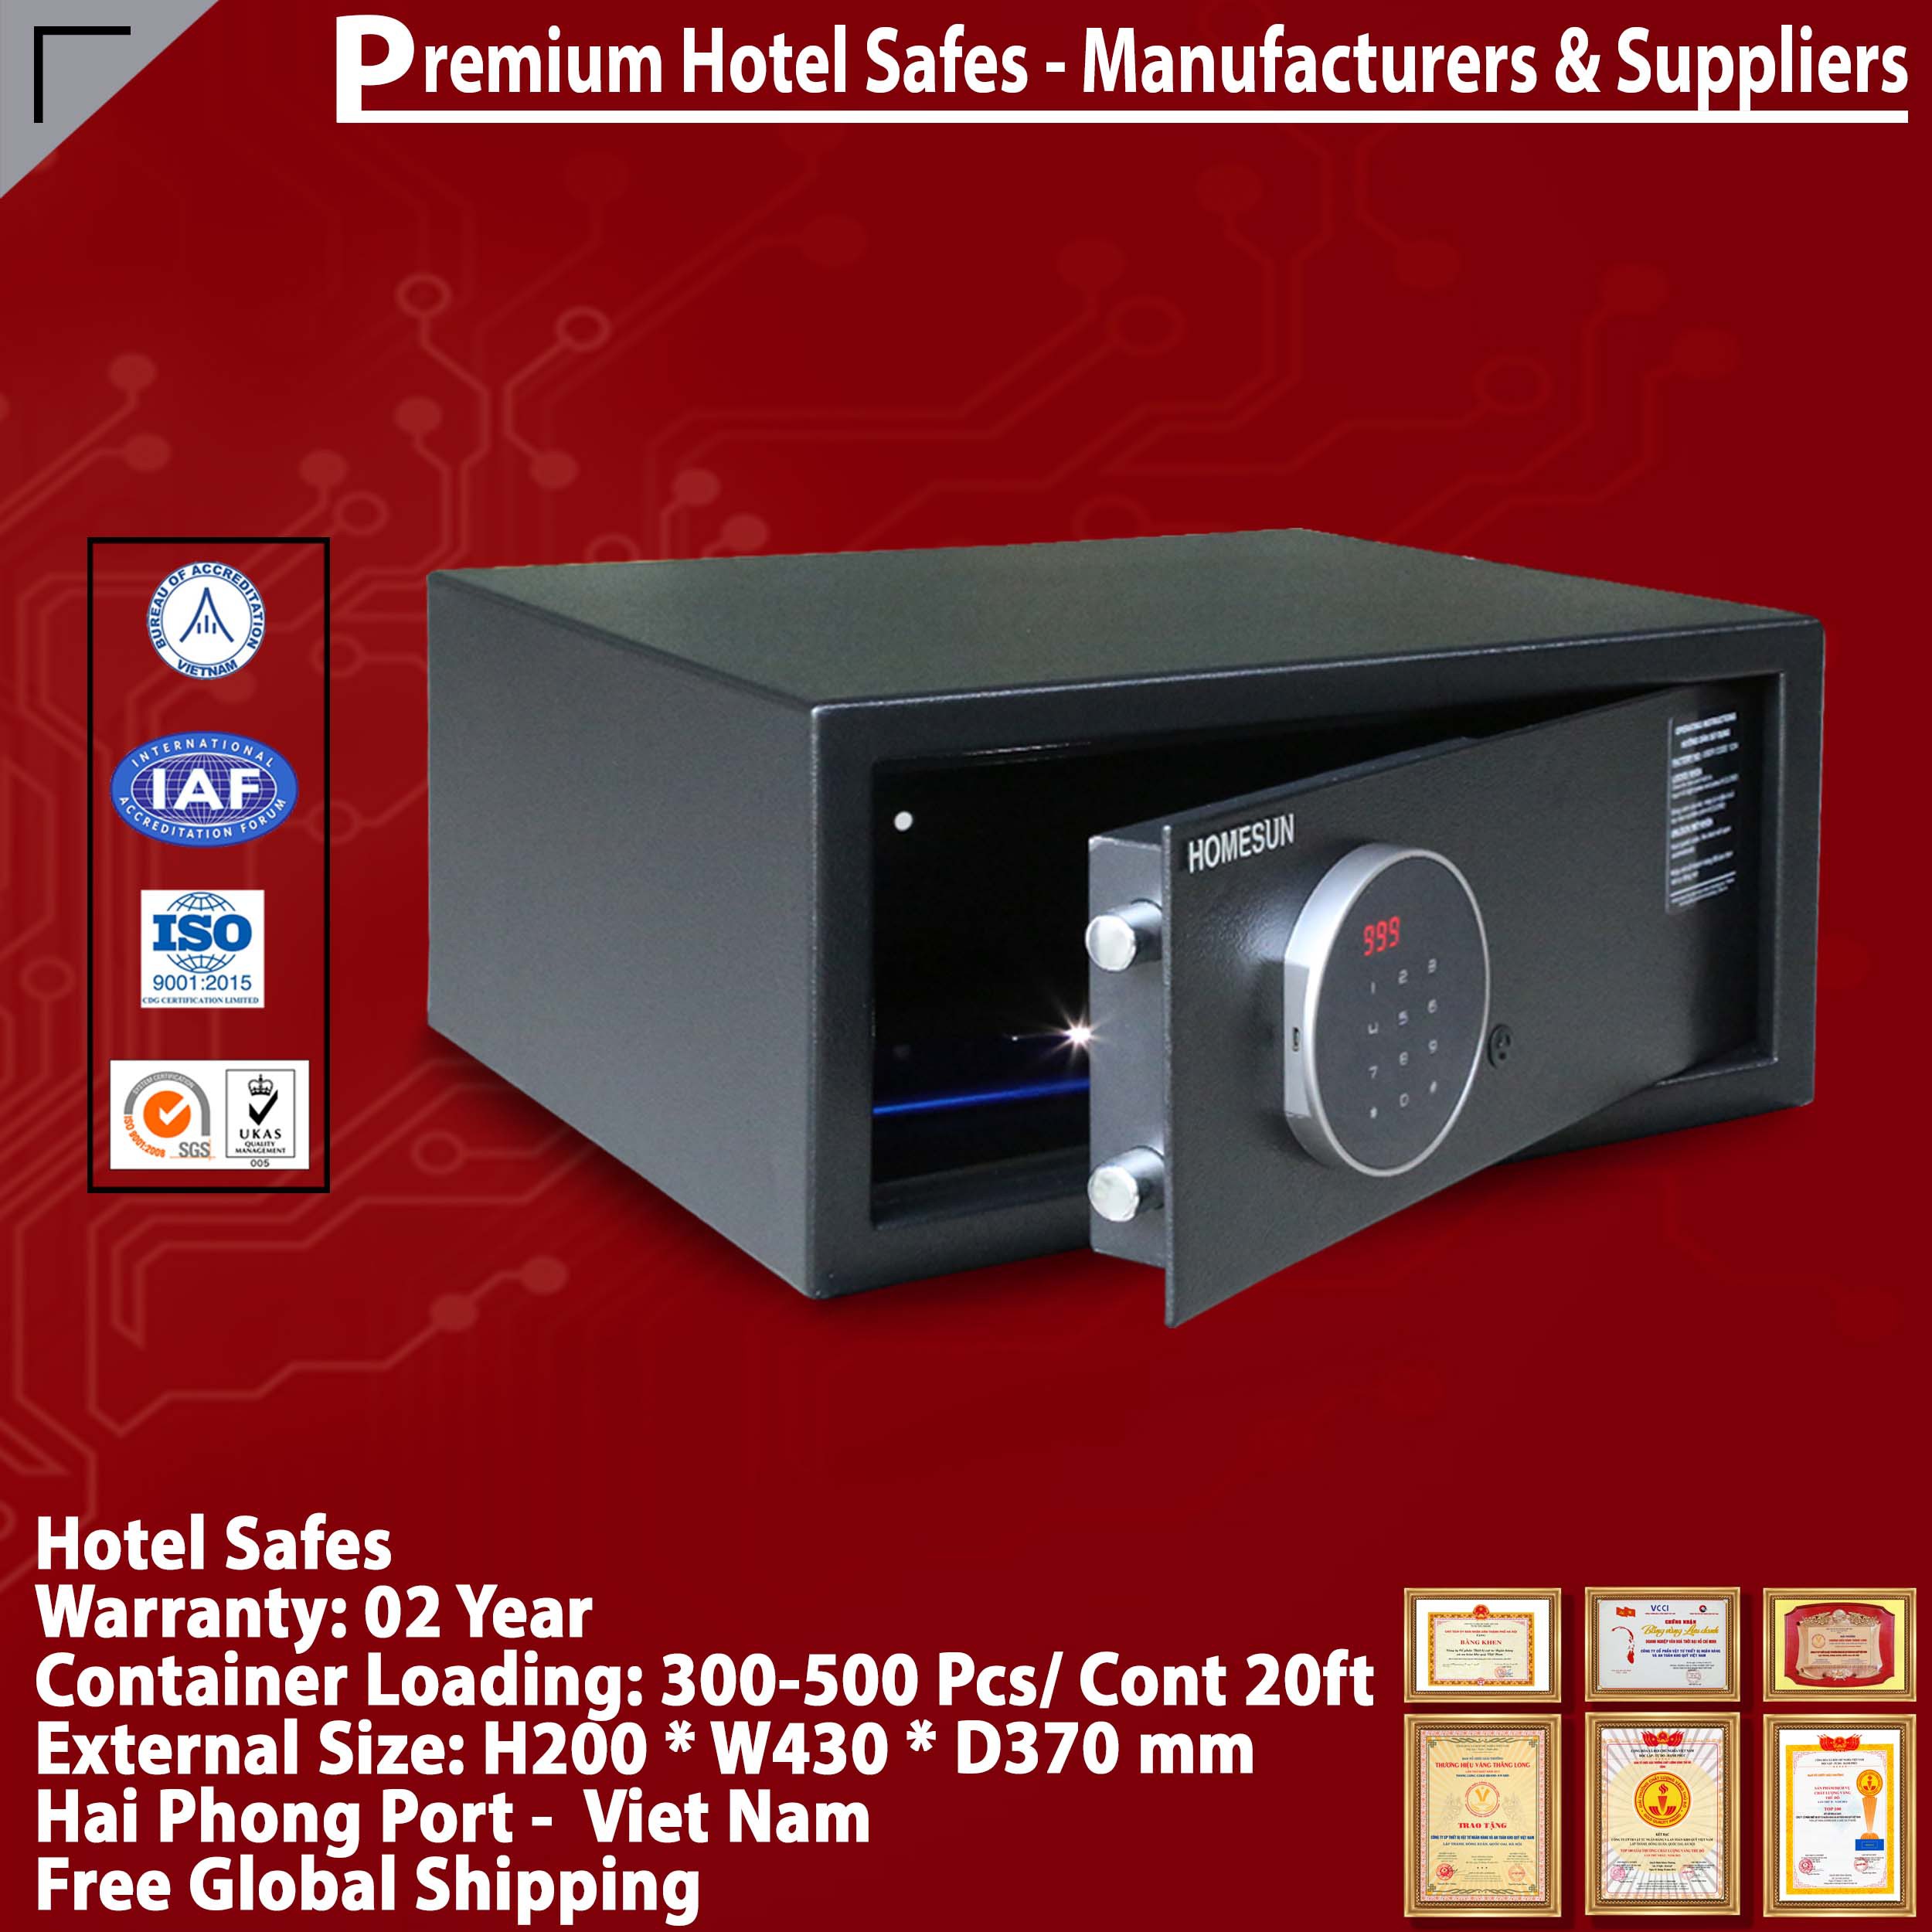 Best Sellers In Hotel Safes High Quality Price Ratio‎